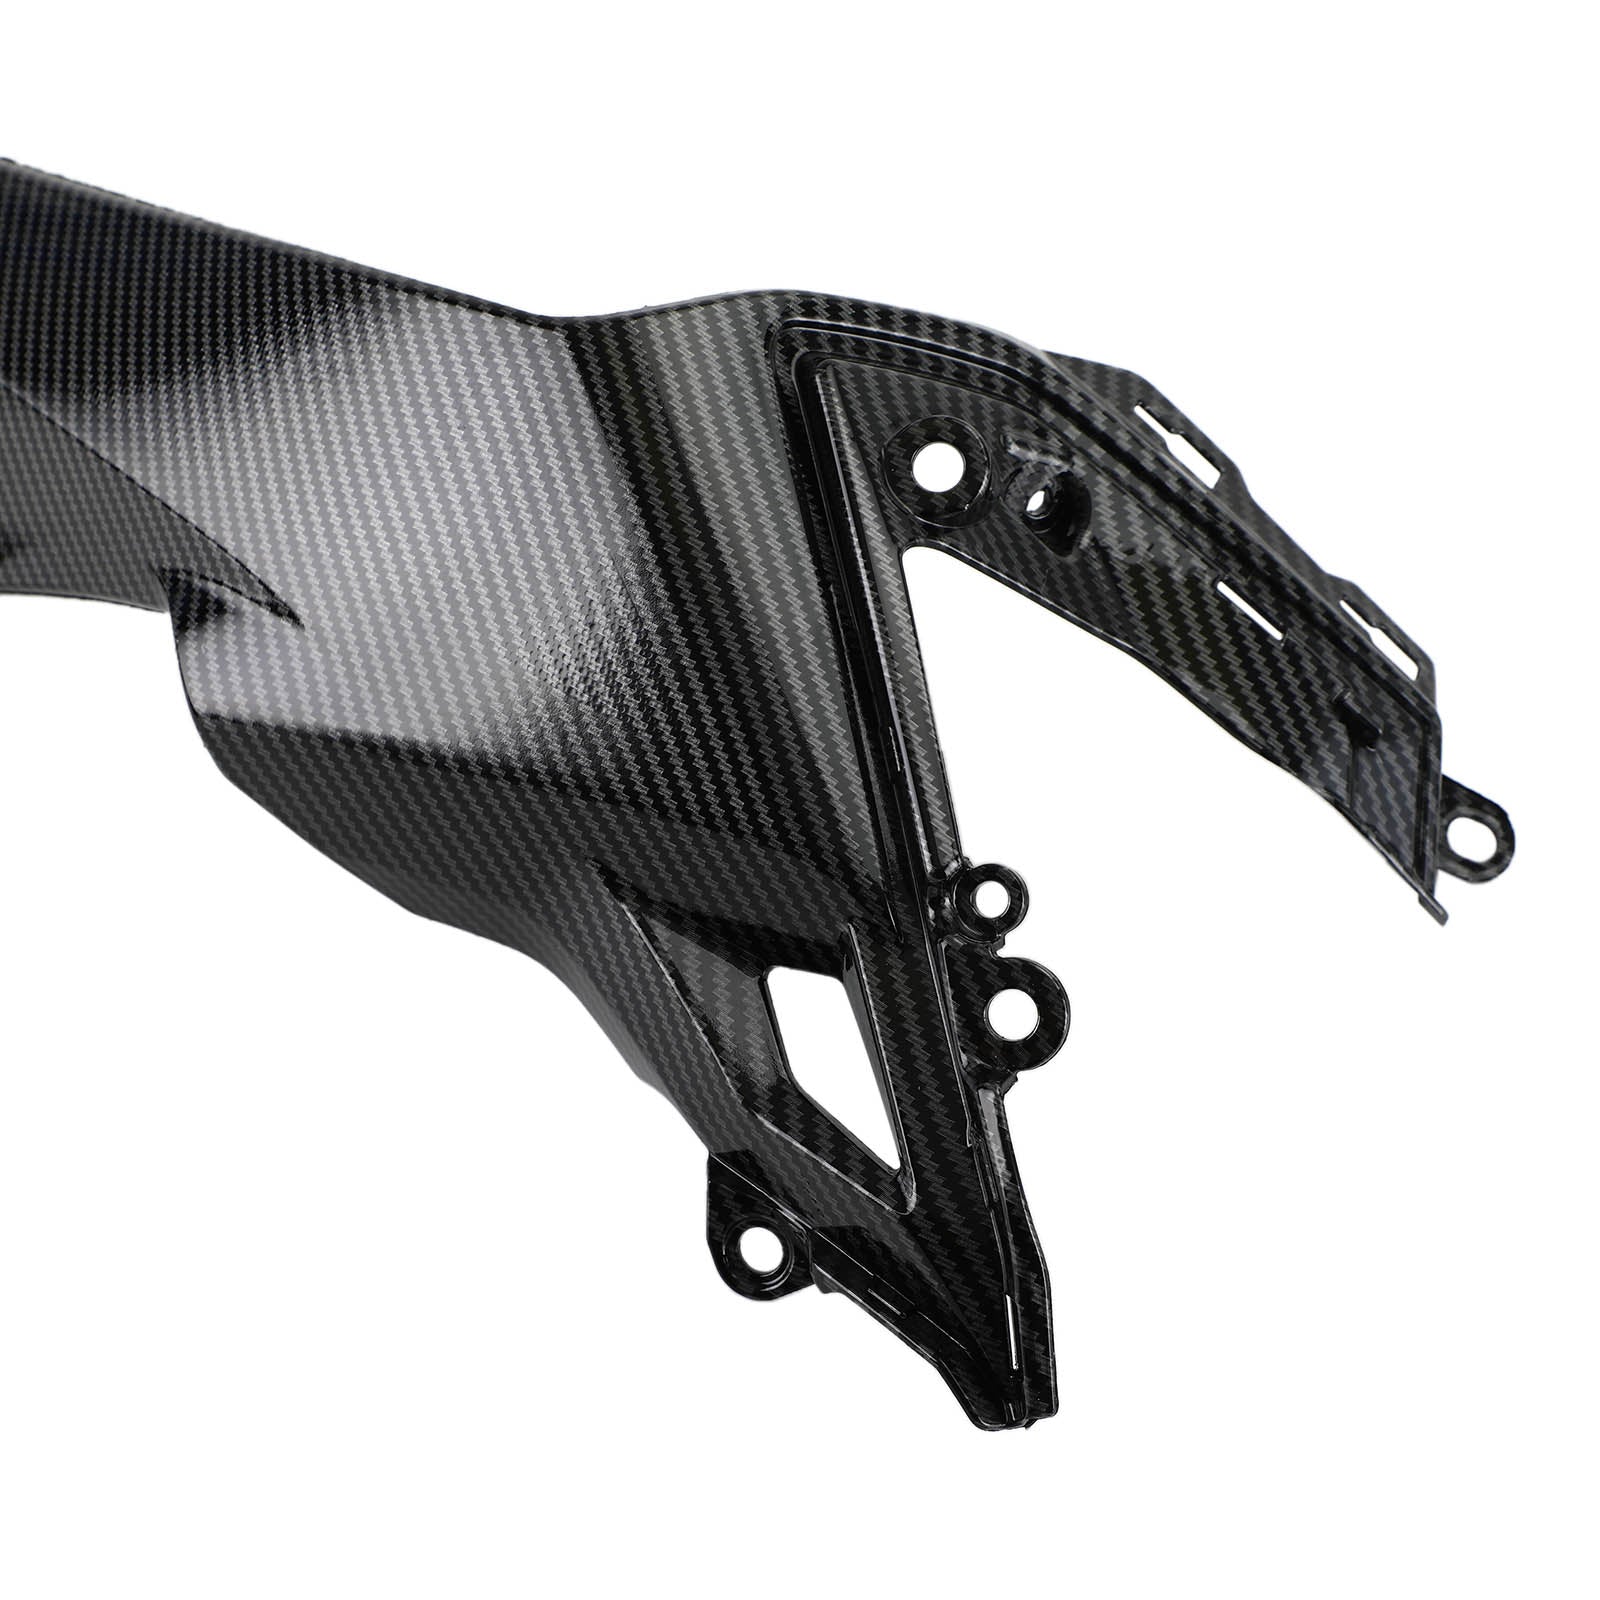 Carbon Tank Side Cover panel Trim fairing Fit For Kawasaki Z650 2017-2020 Generic